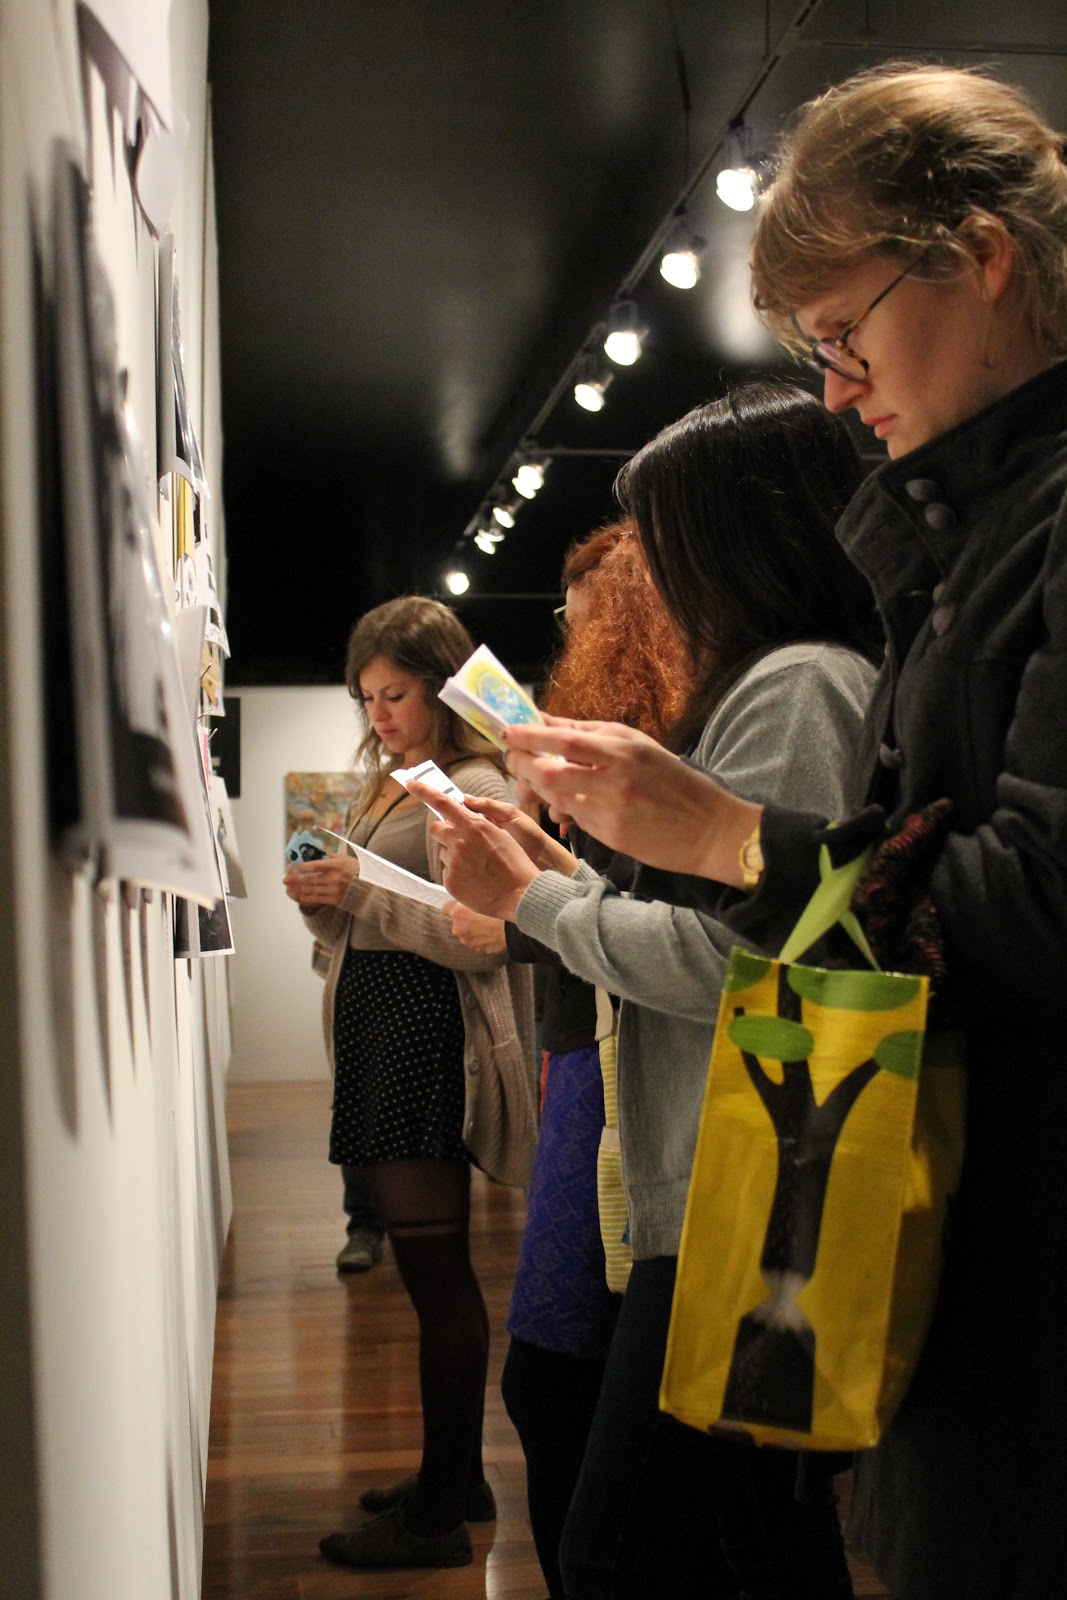 Attendees at the 2015 Zine Show at 22 North Gallery.